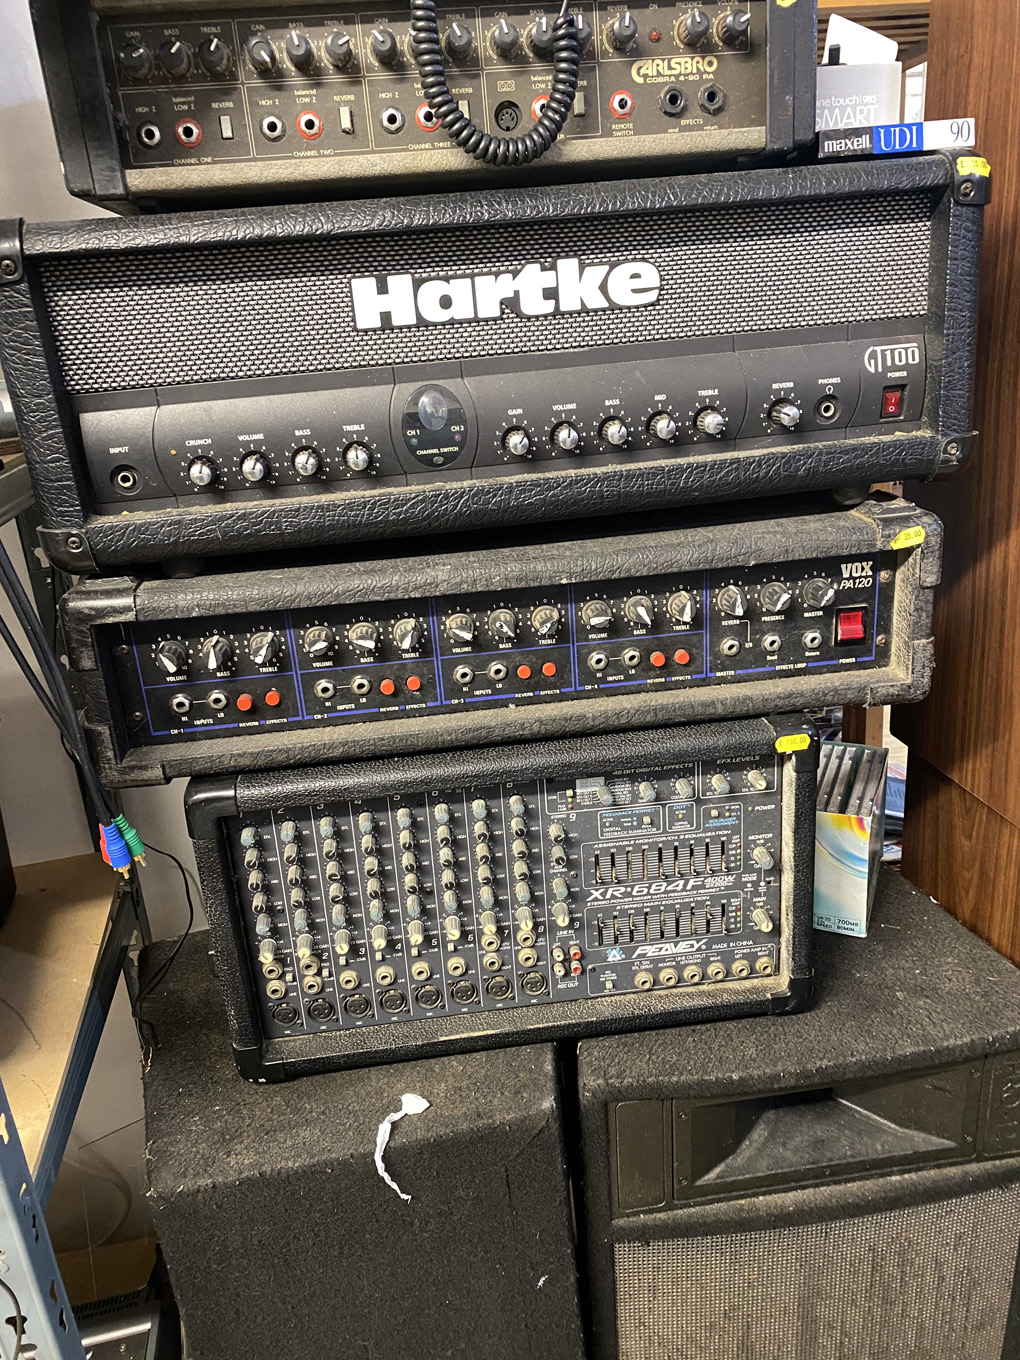 A stack of old, dusty stage PAs and mixer amps